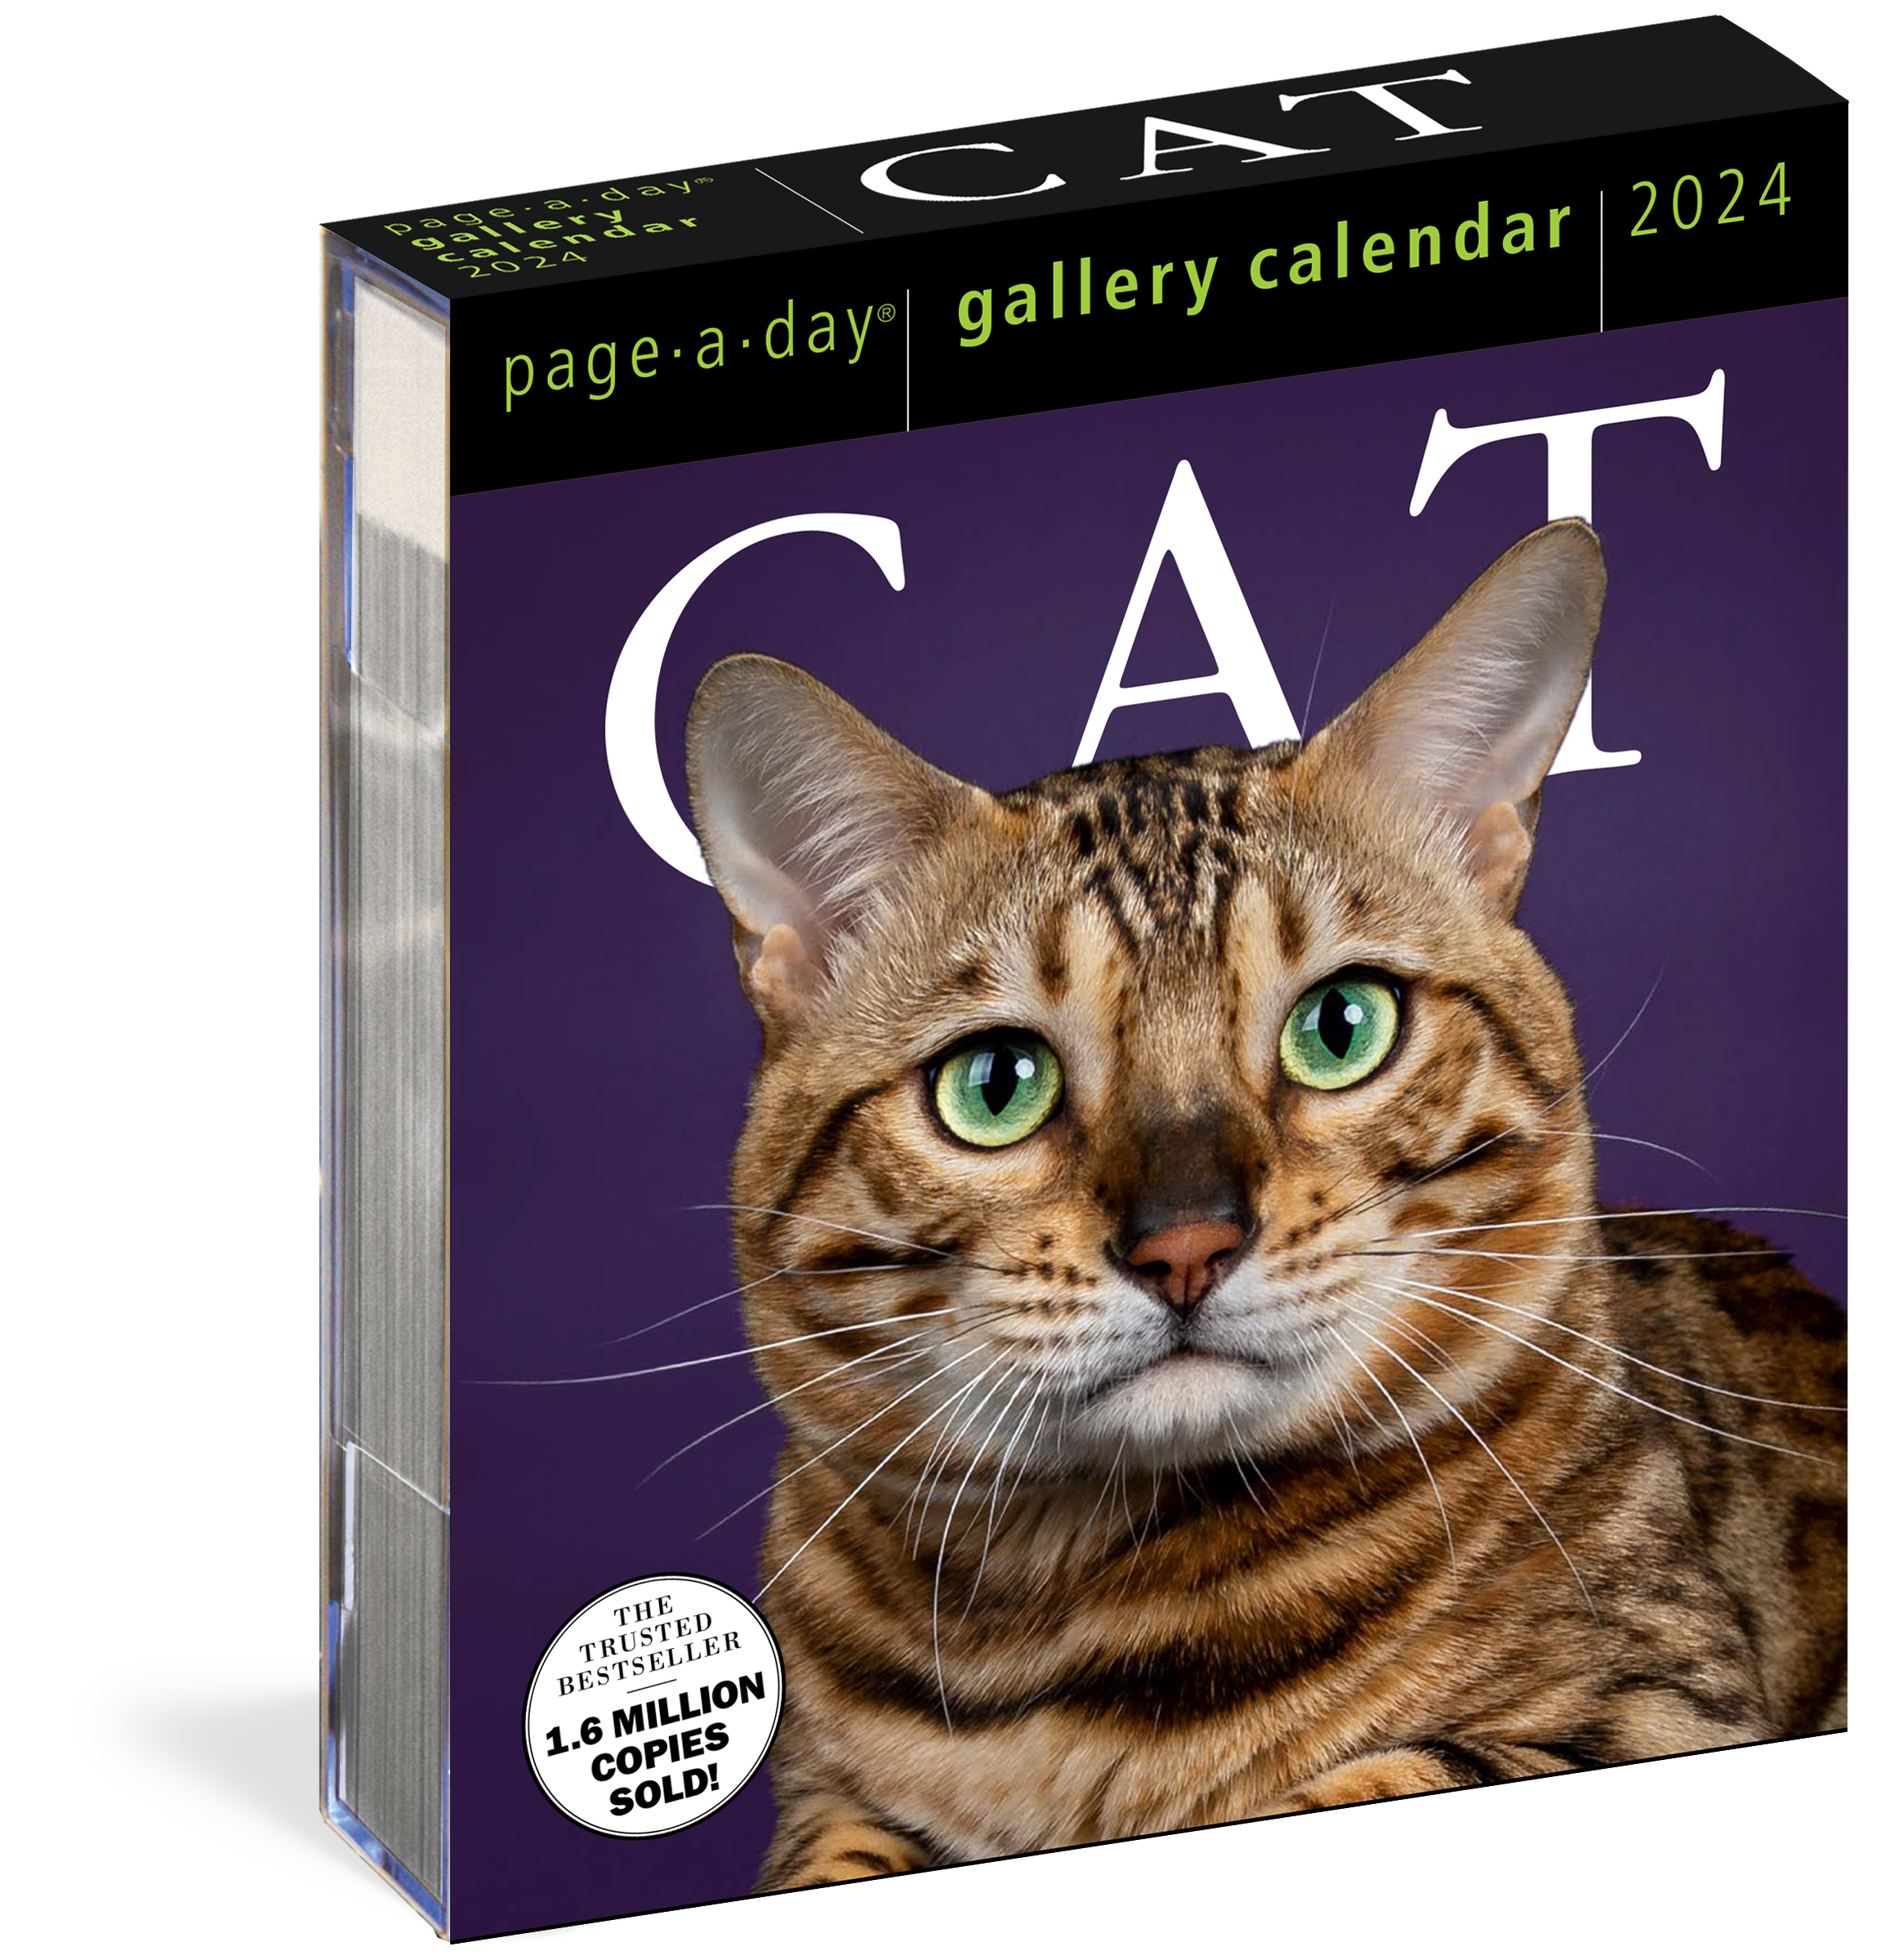 Cat Page-A-Day Gallery Calendar 2024 : A Delightful Gallery of Cats for Your Desktop | 